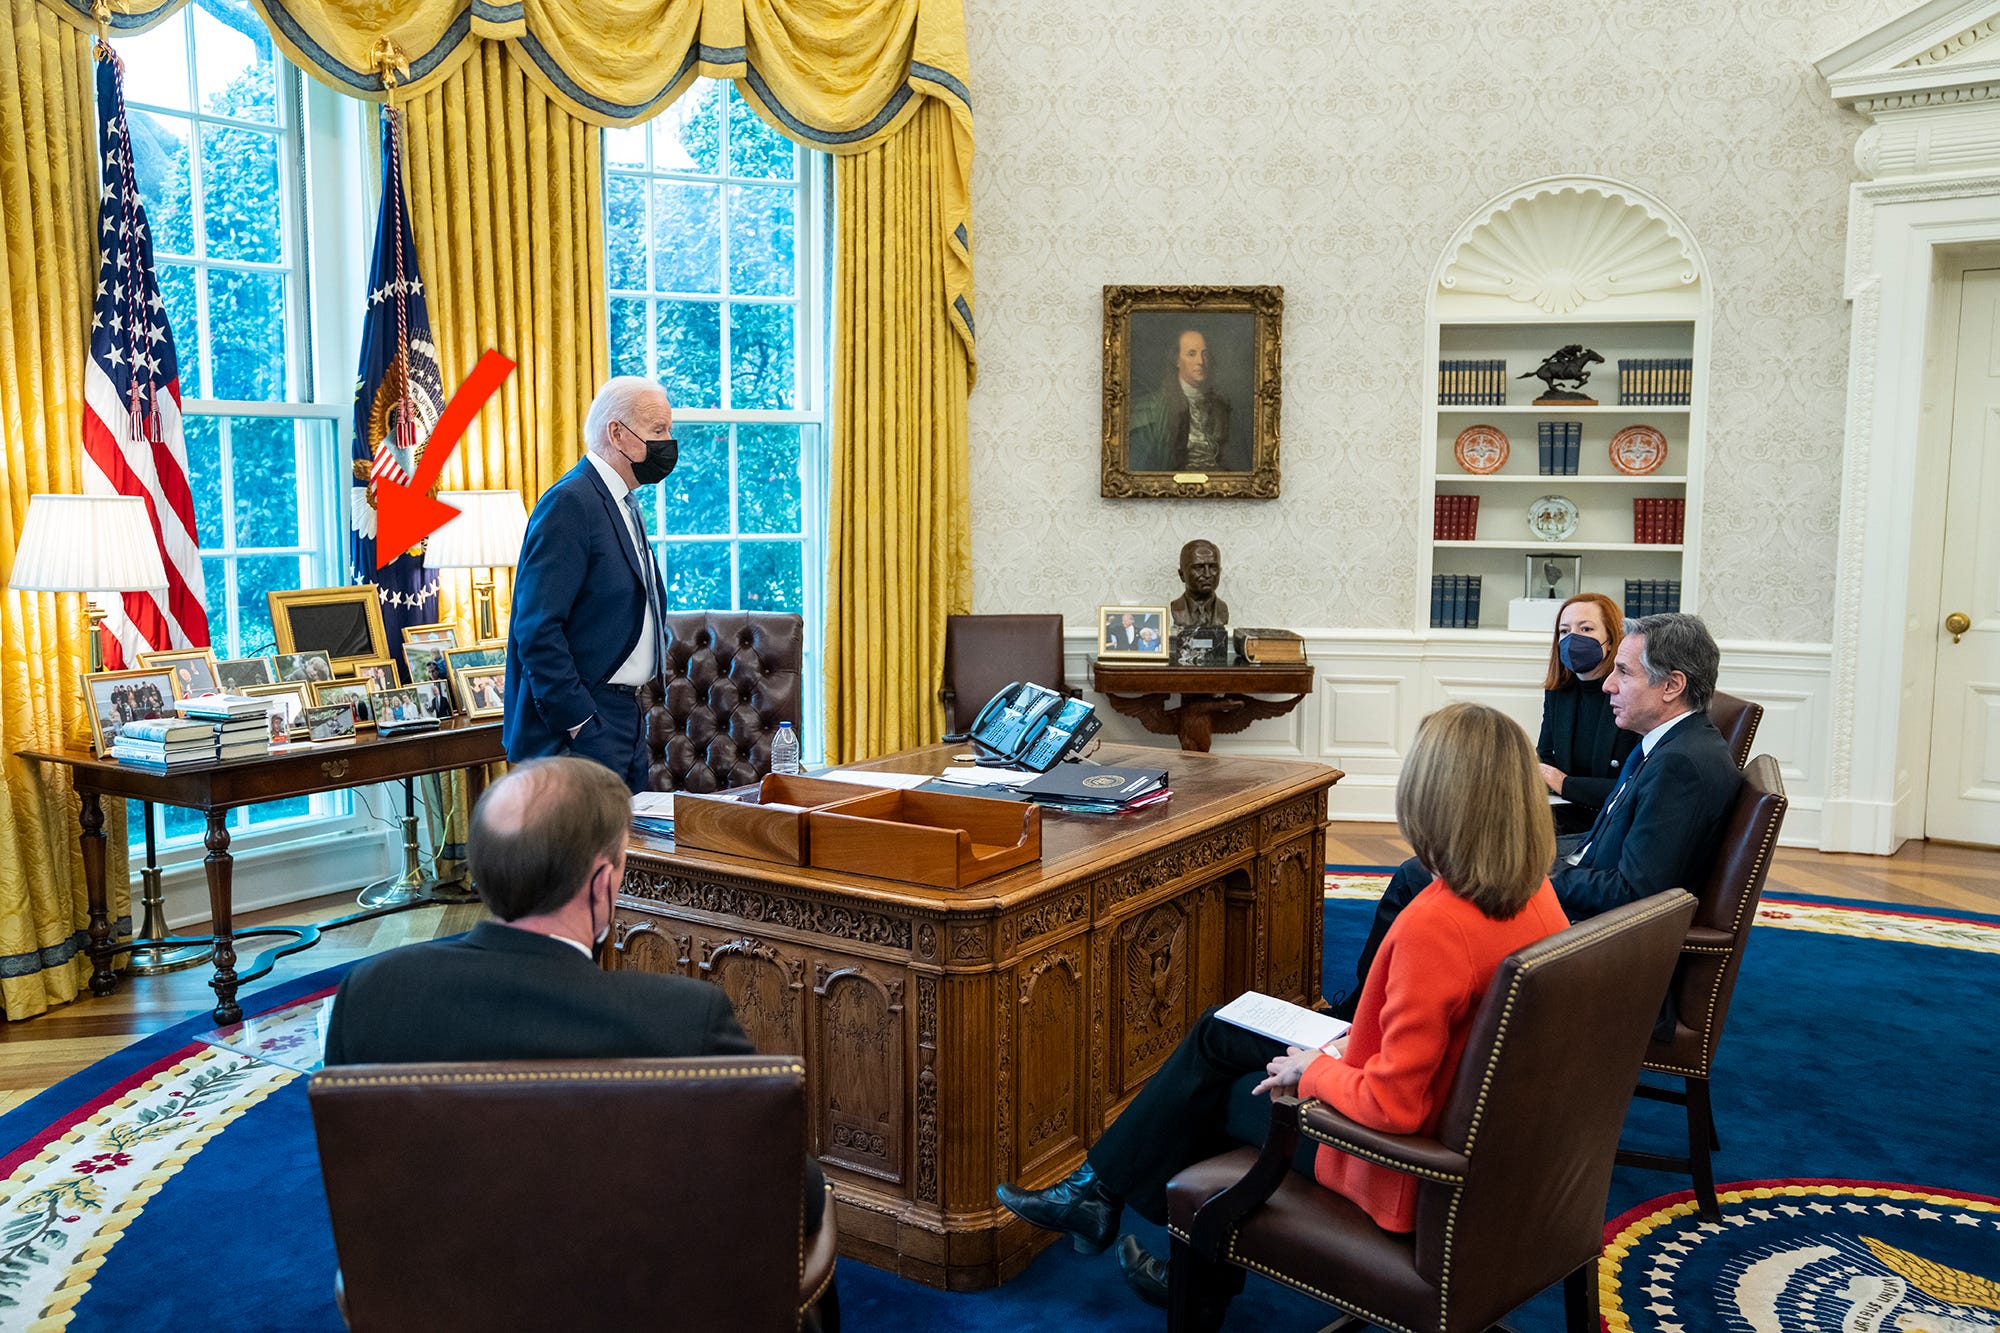 64: The Empty Picture Frame in the Oval Office